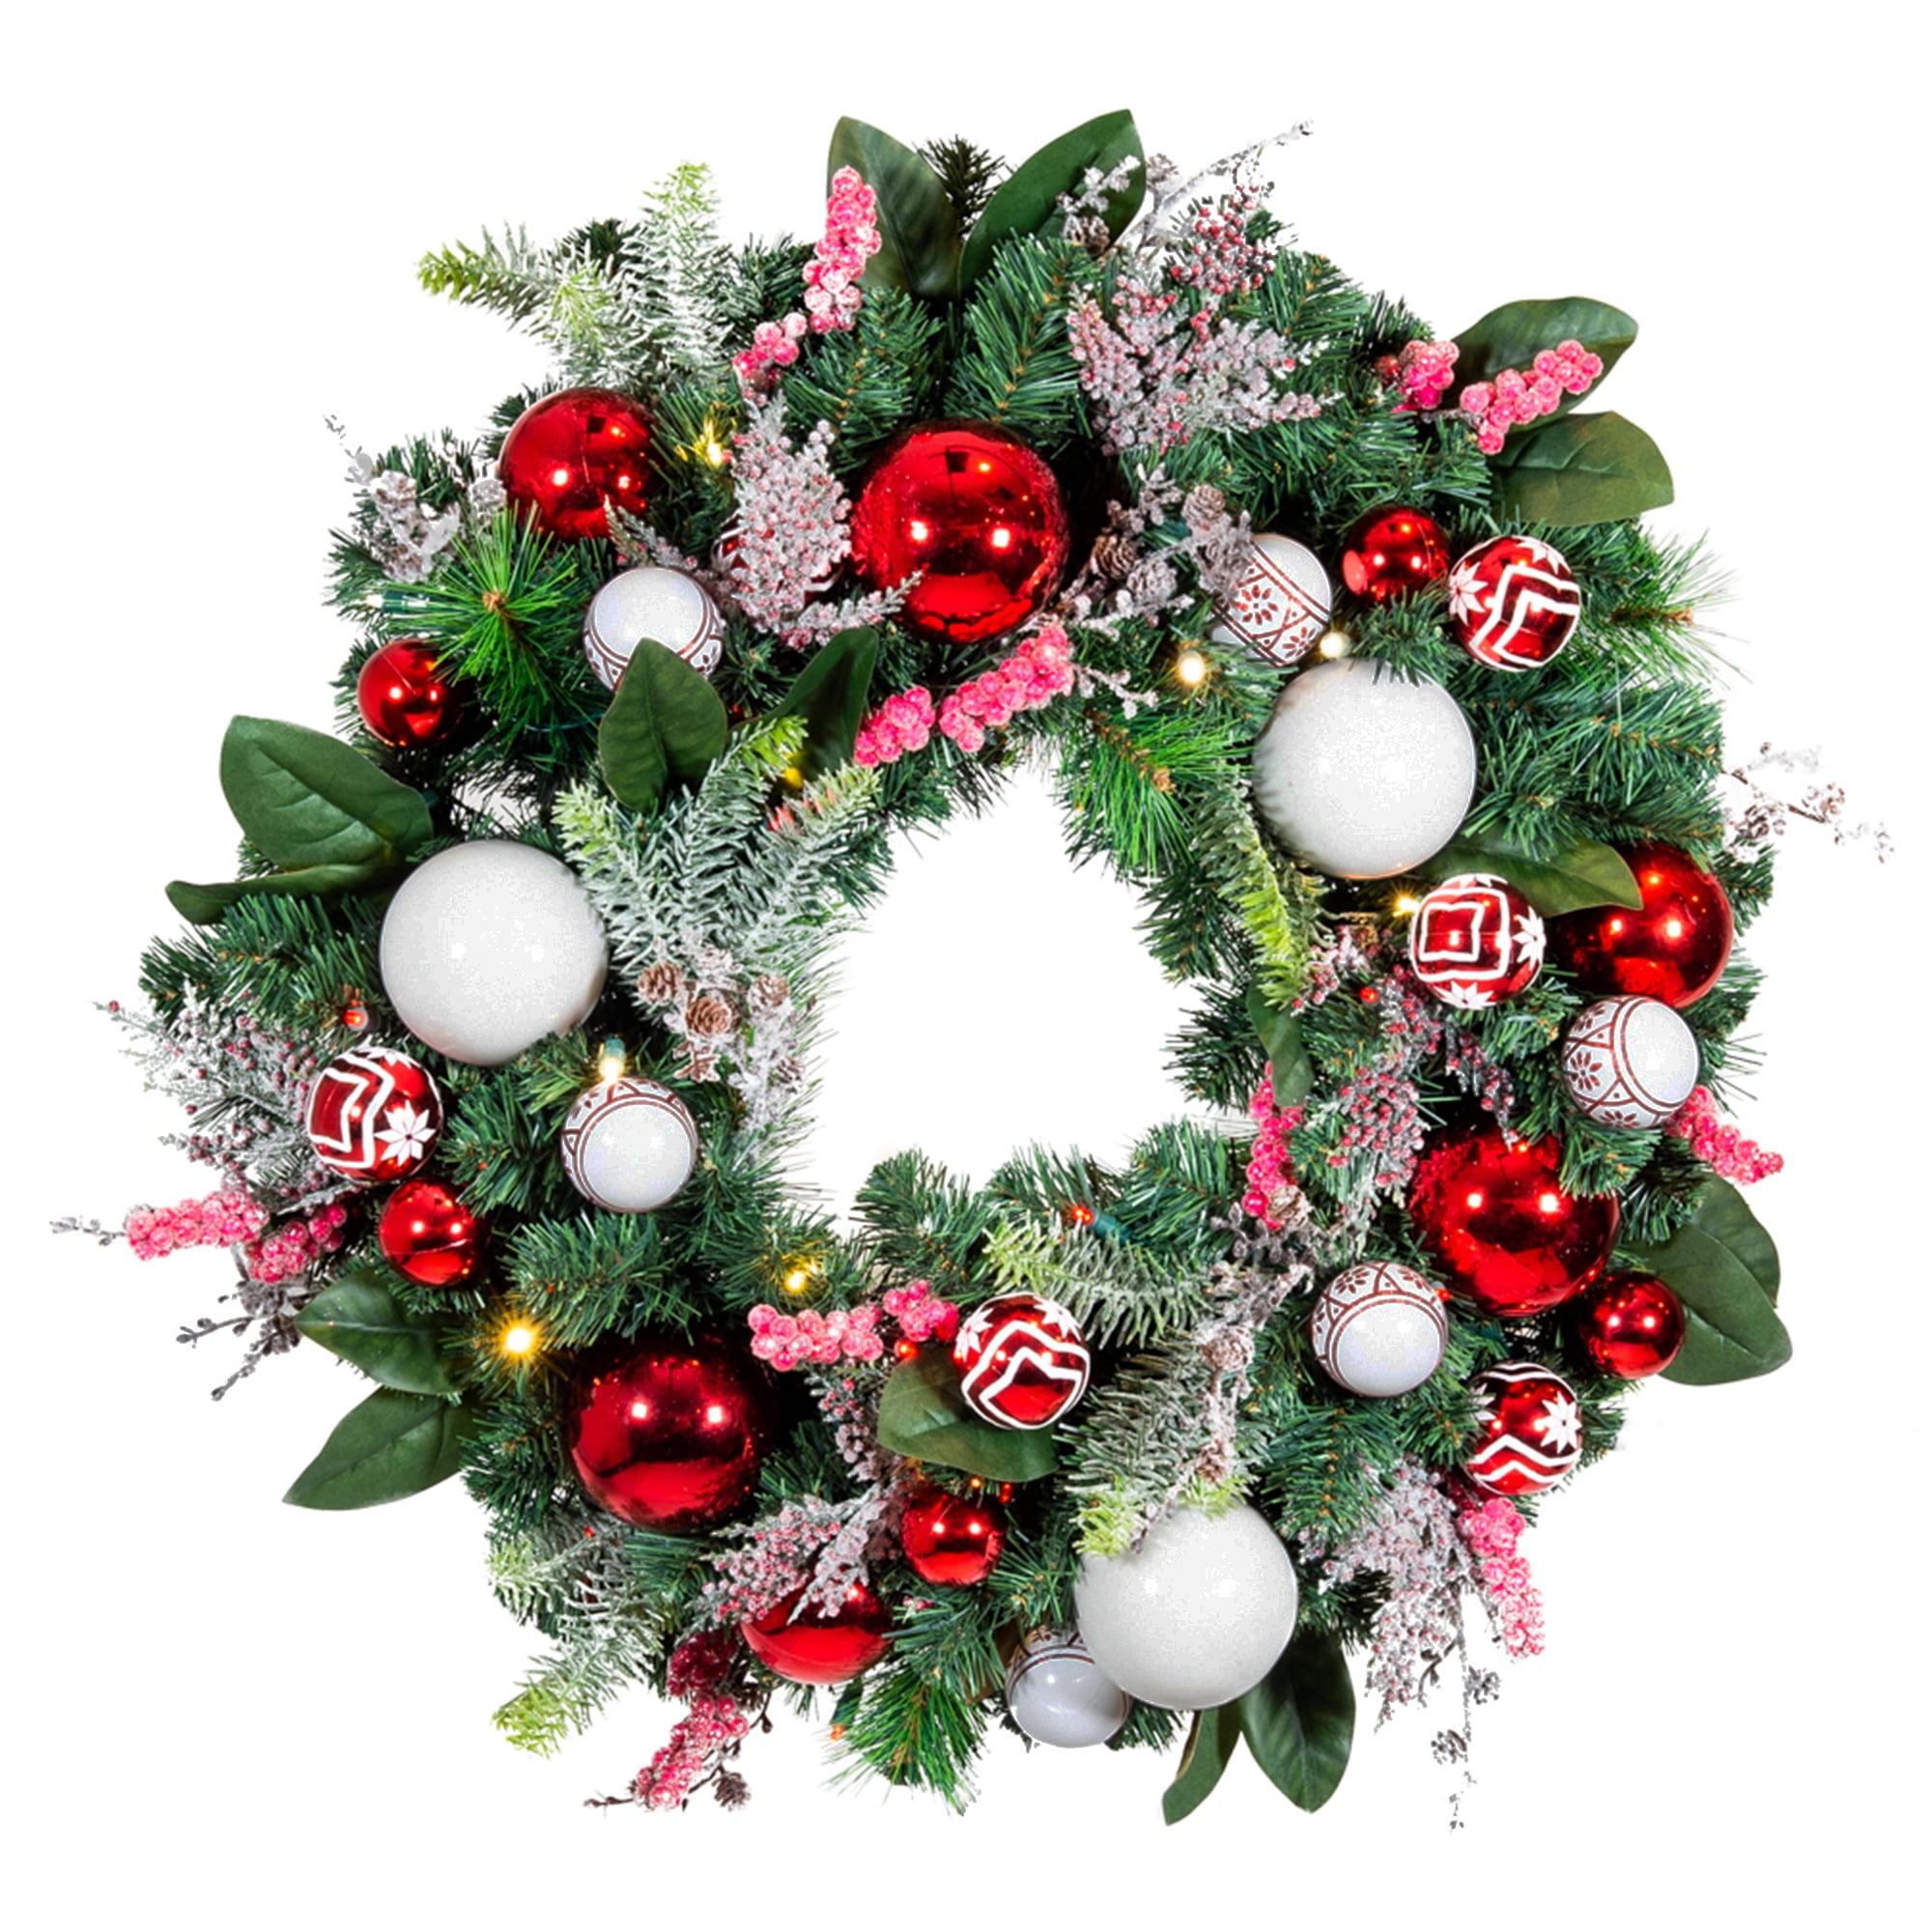 Festive Nordic 30" Pre-Lit Pine Wreath with LED Lights and Ribbon Accents